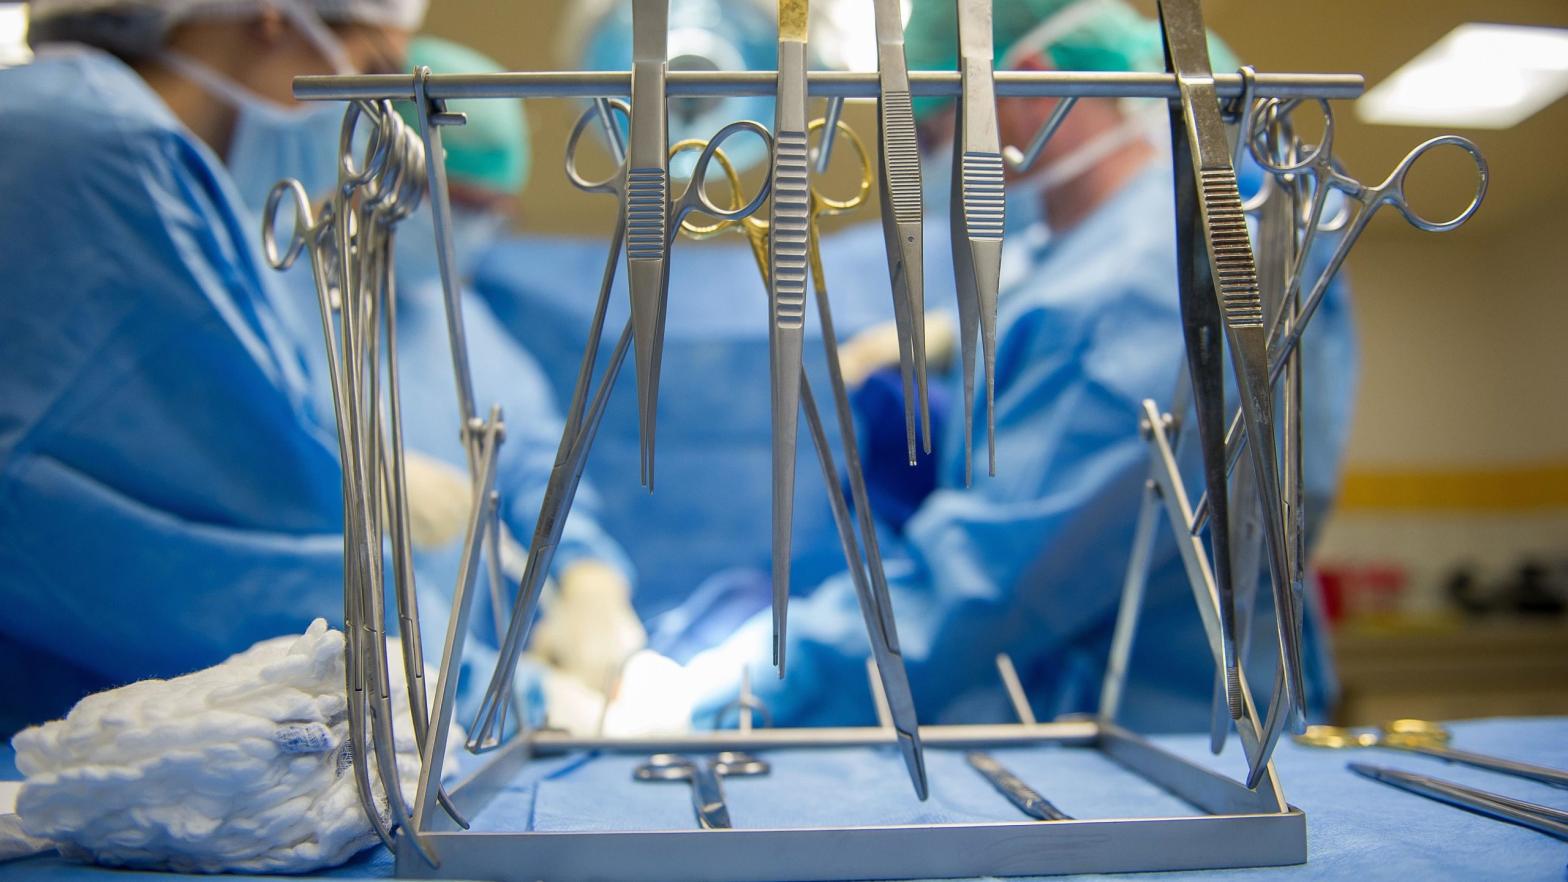 A display of surgical tools, including forceps. (Photo: Guillaume Souvant, Getty Images)